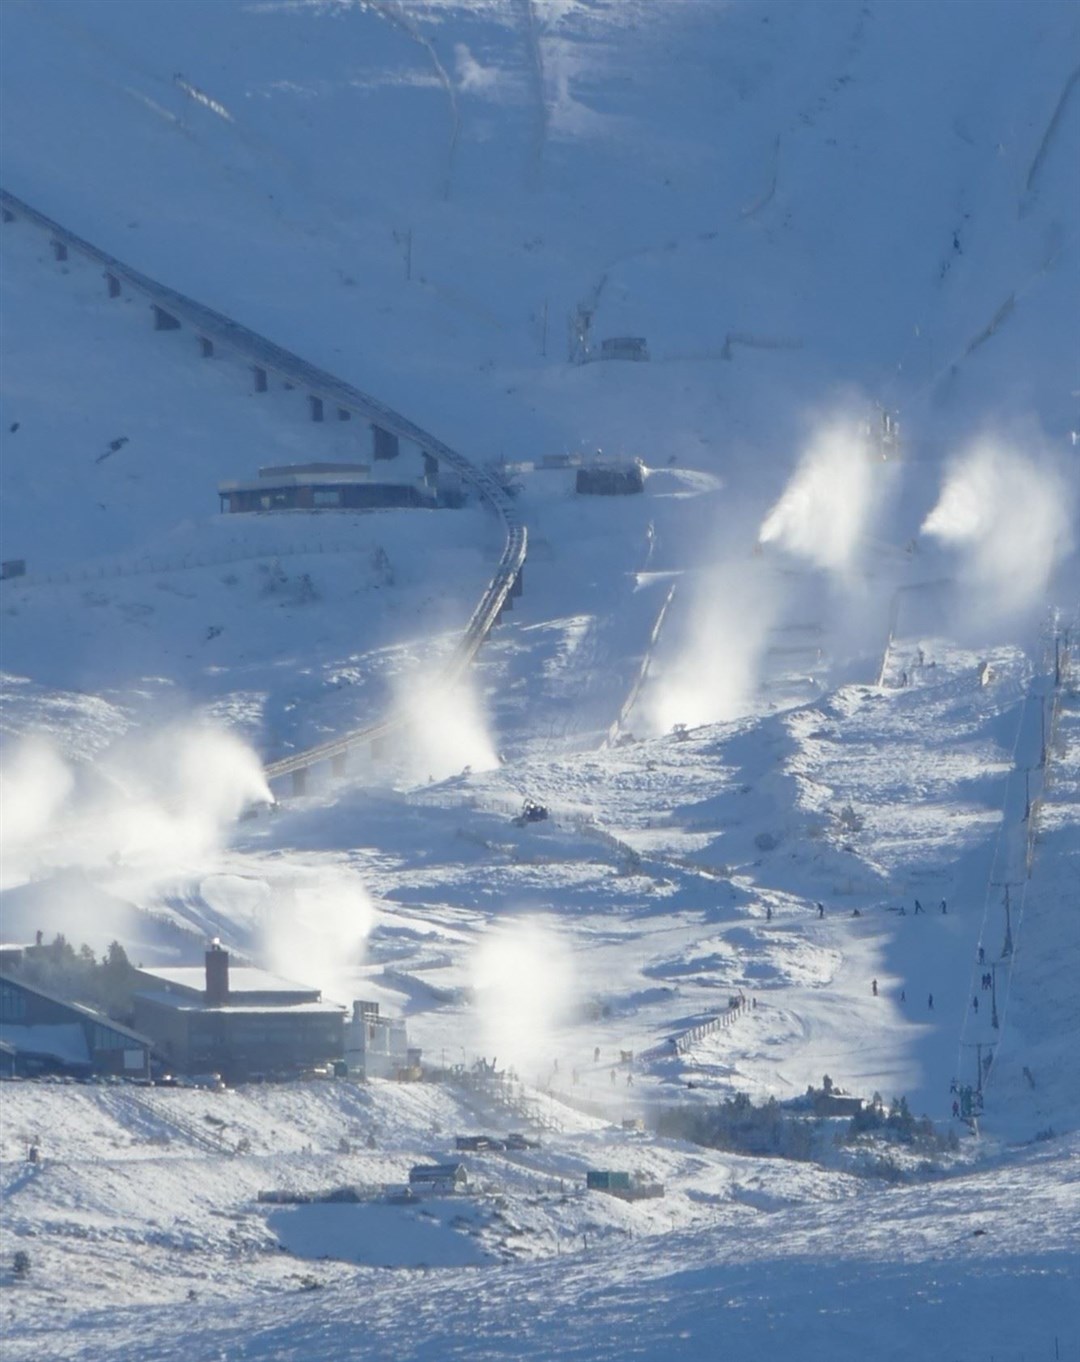 Snow canons at work at Cairngorm Mountain this past winter (Photo: David Macleod)